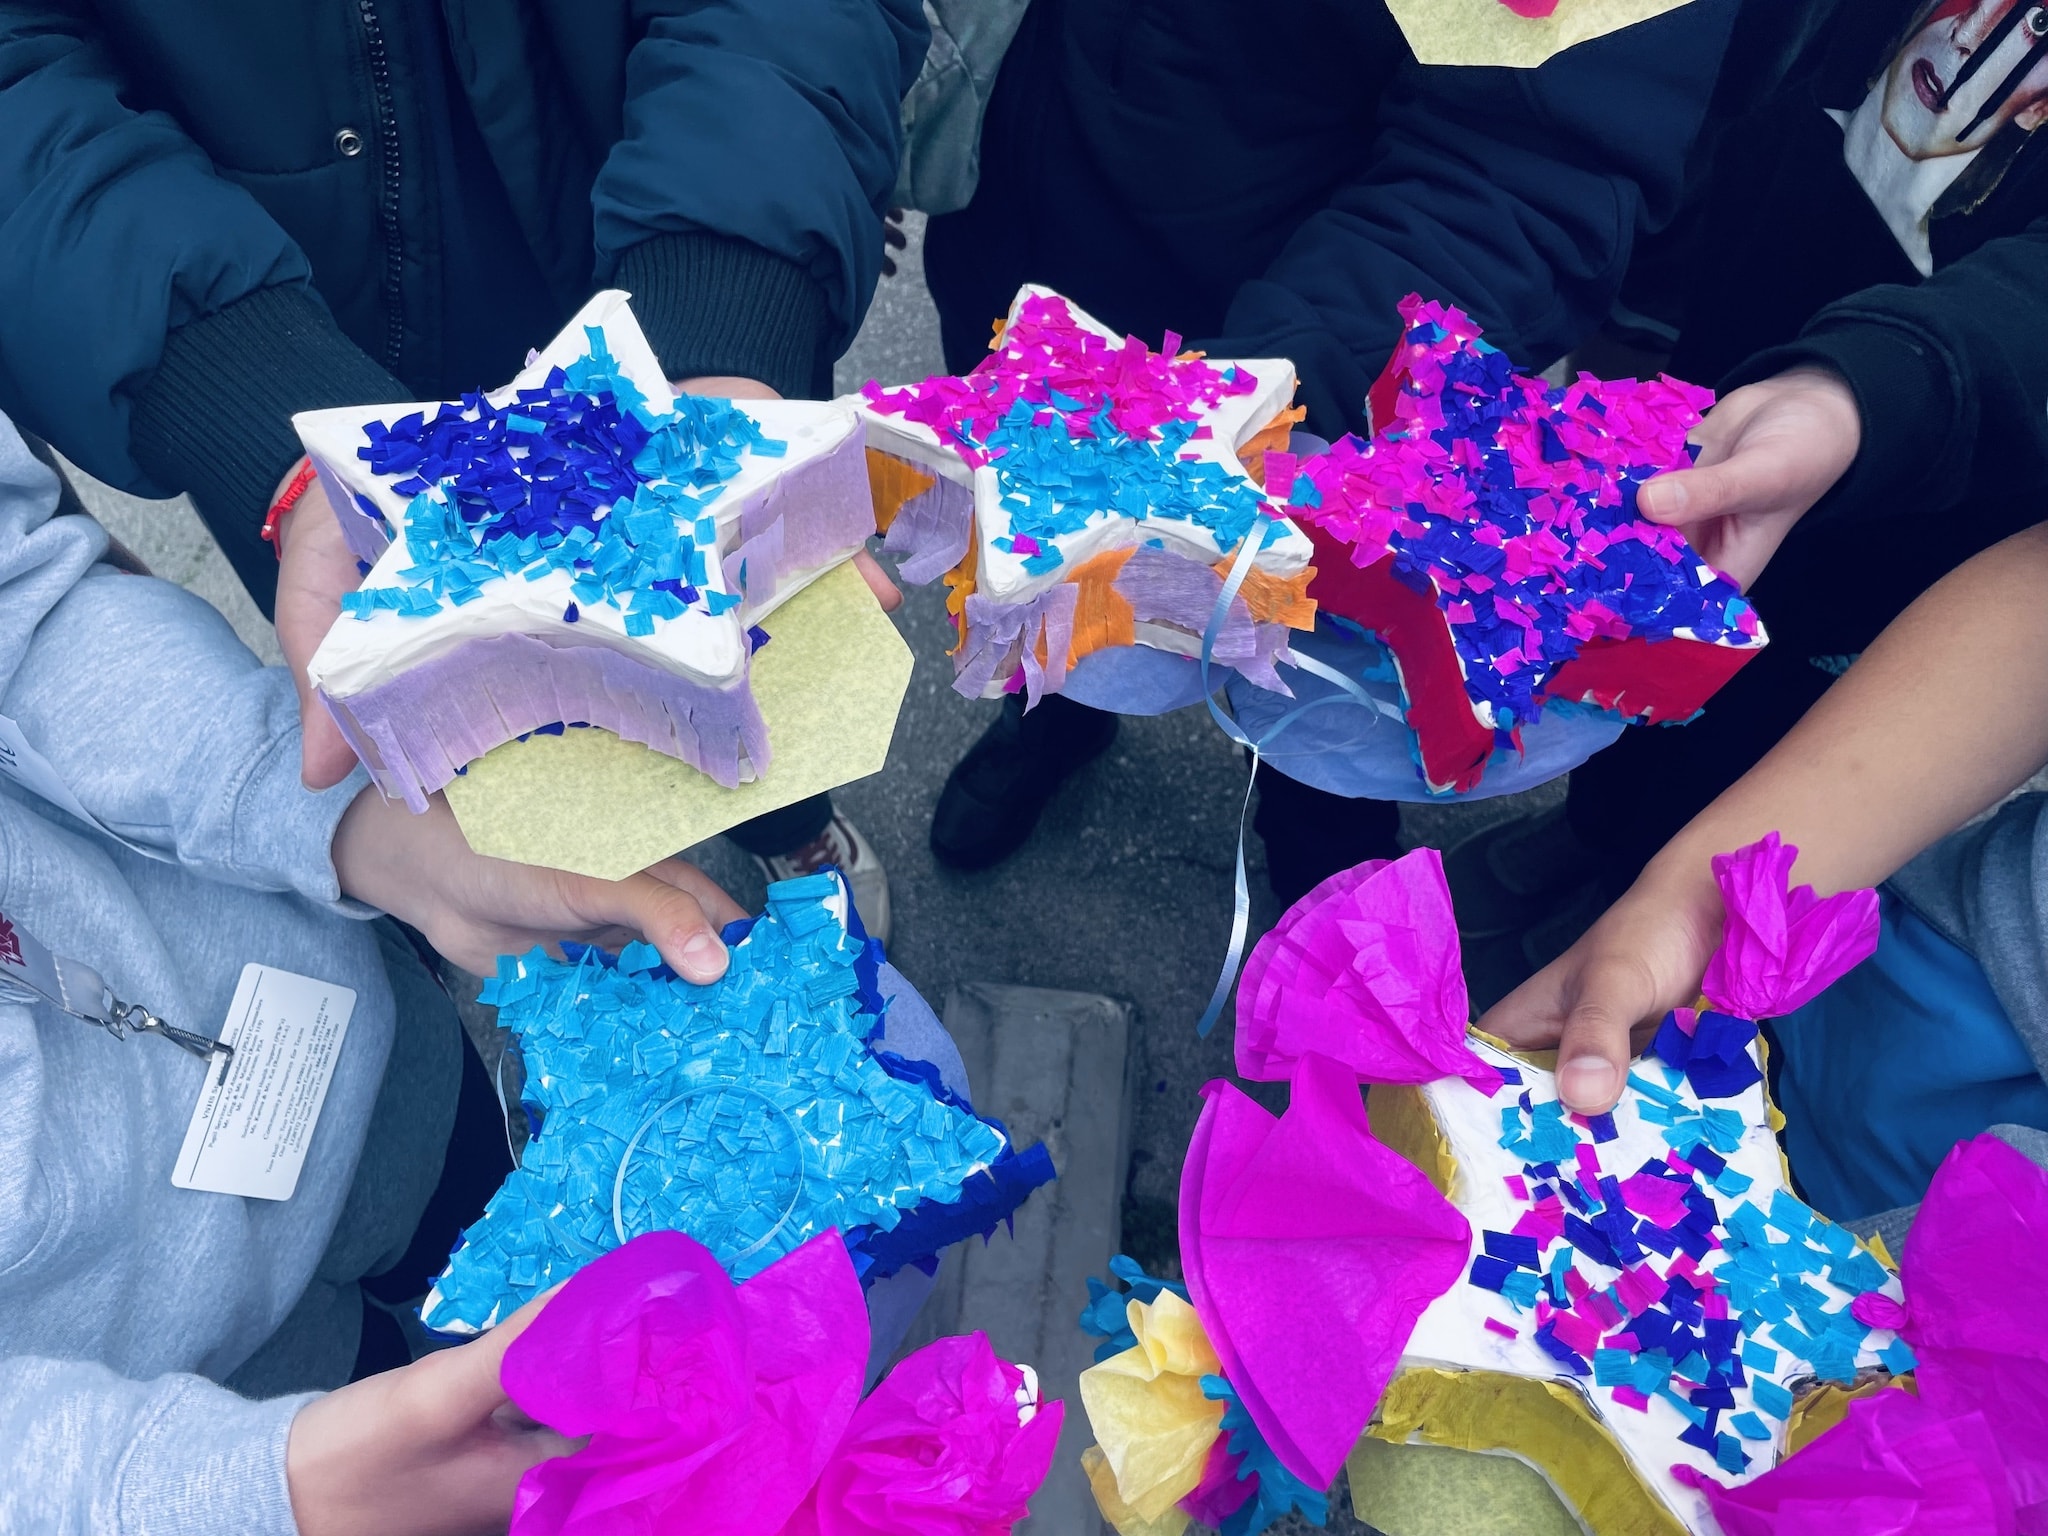 close up photo of colorful star pinata's with varying shades of blues purples and oranges held in a group by Van Nuys High School student hands reaching from off-camera